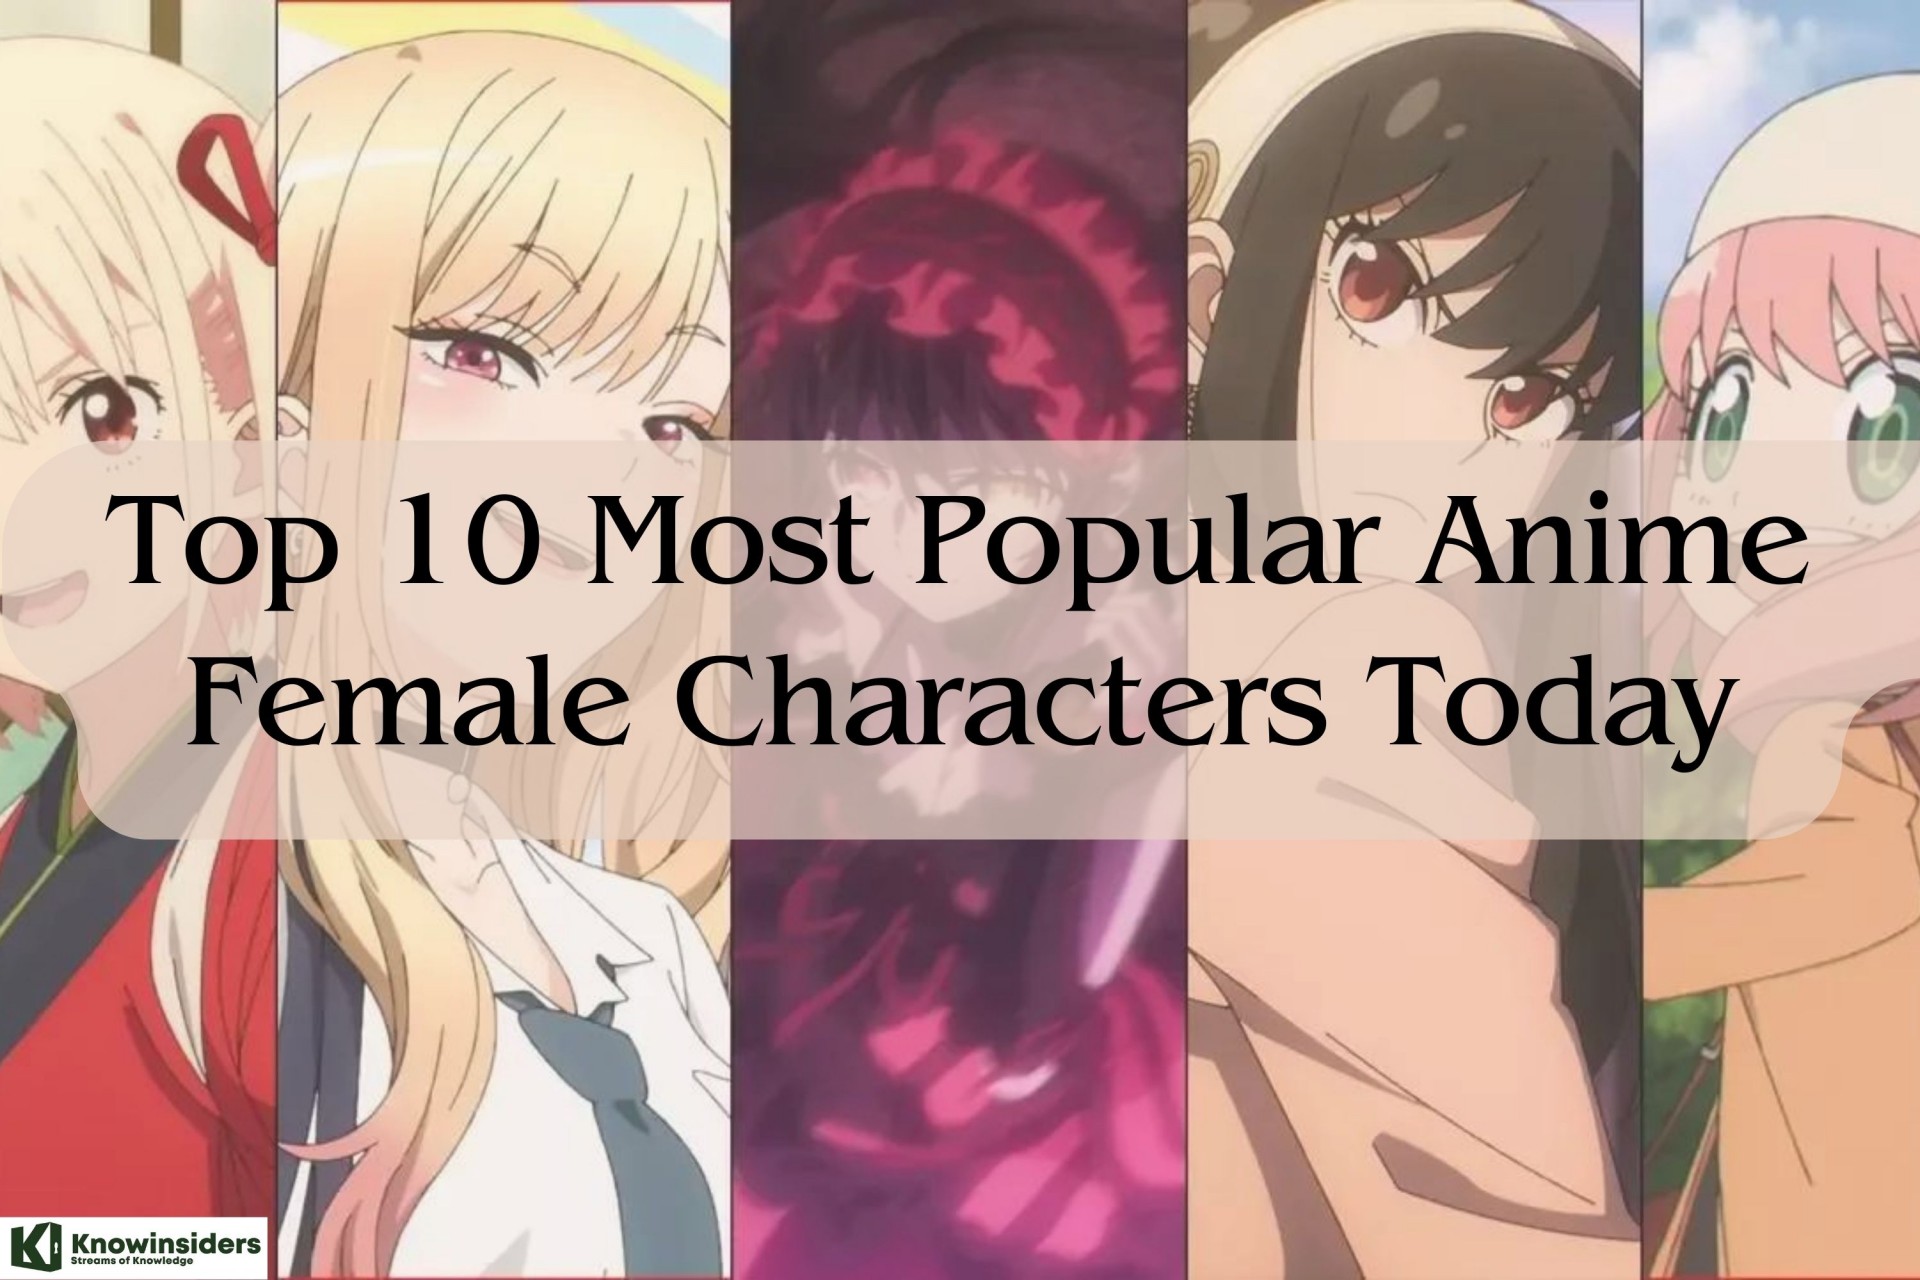 Top 10 Most Popular Anime Female Characters Today